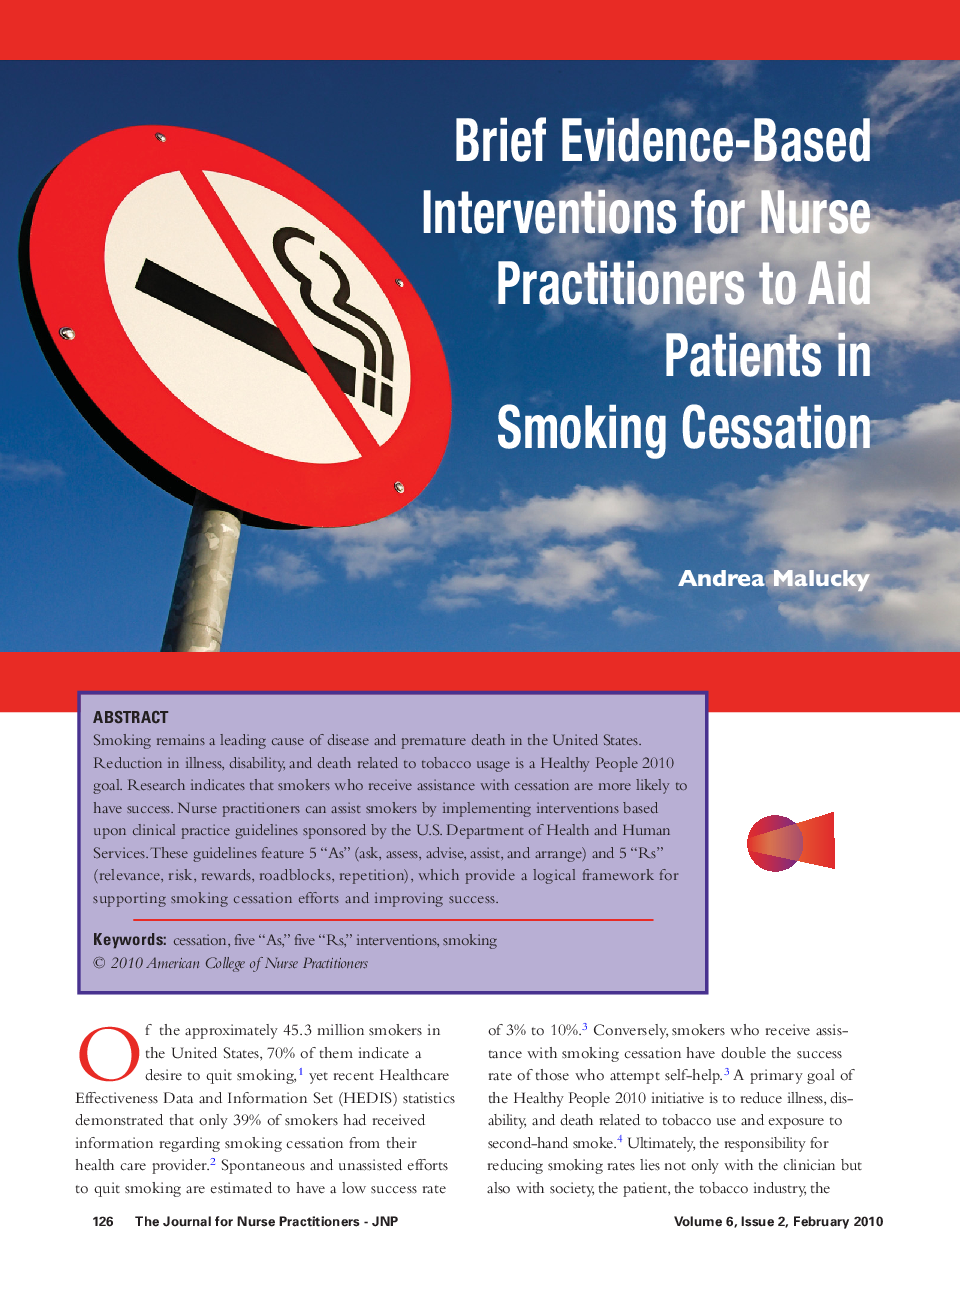 Brief Evidence-Based Interventions for Nurse Practitioners to Aid Patients in Smoking Cessation 